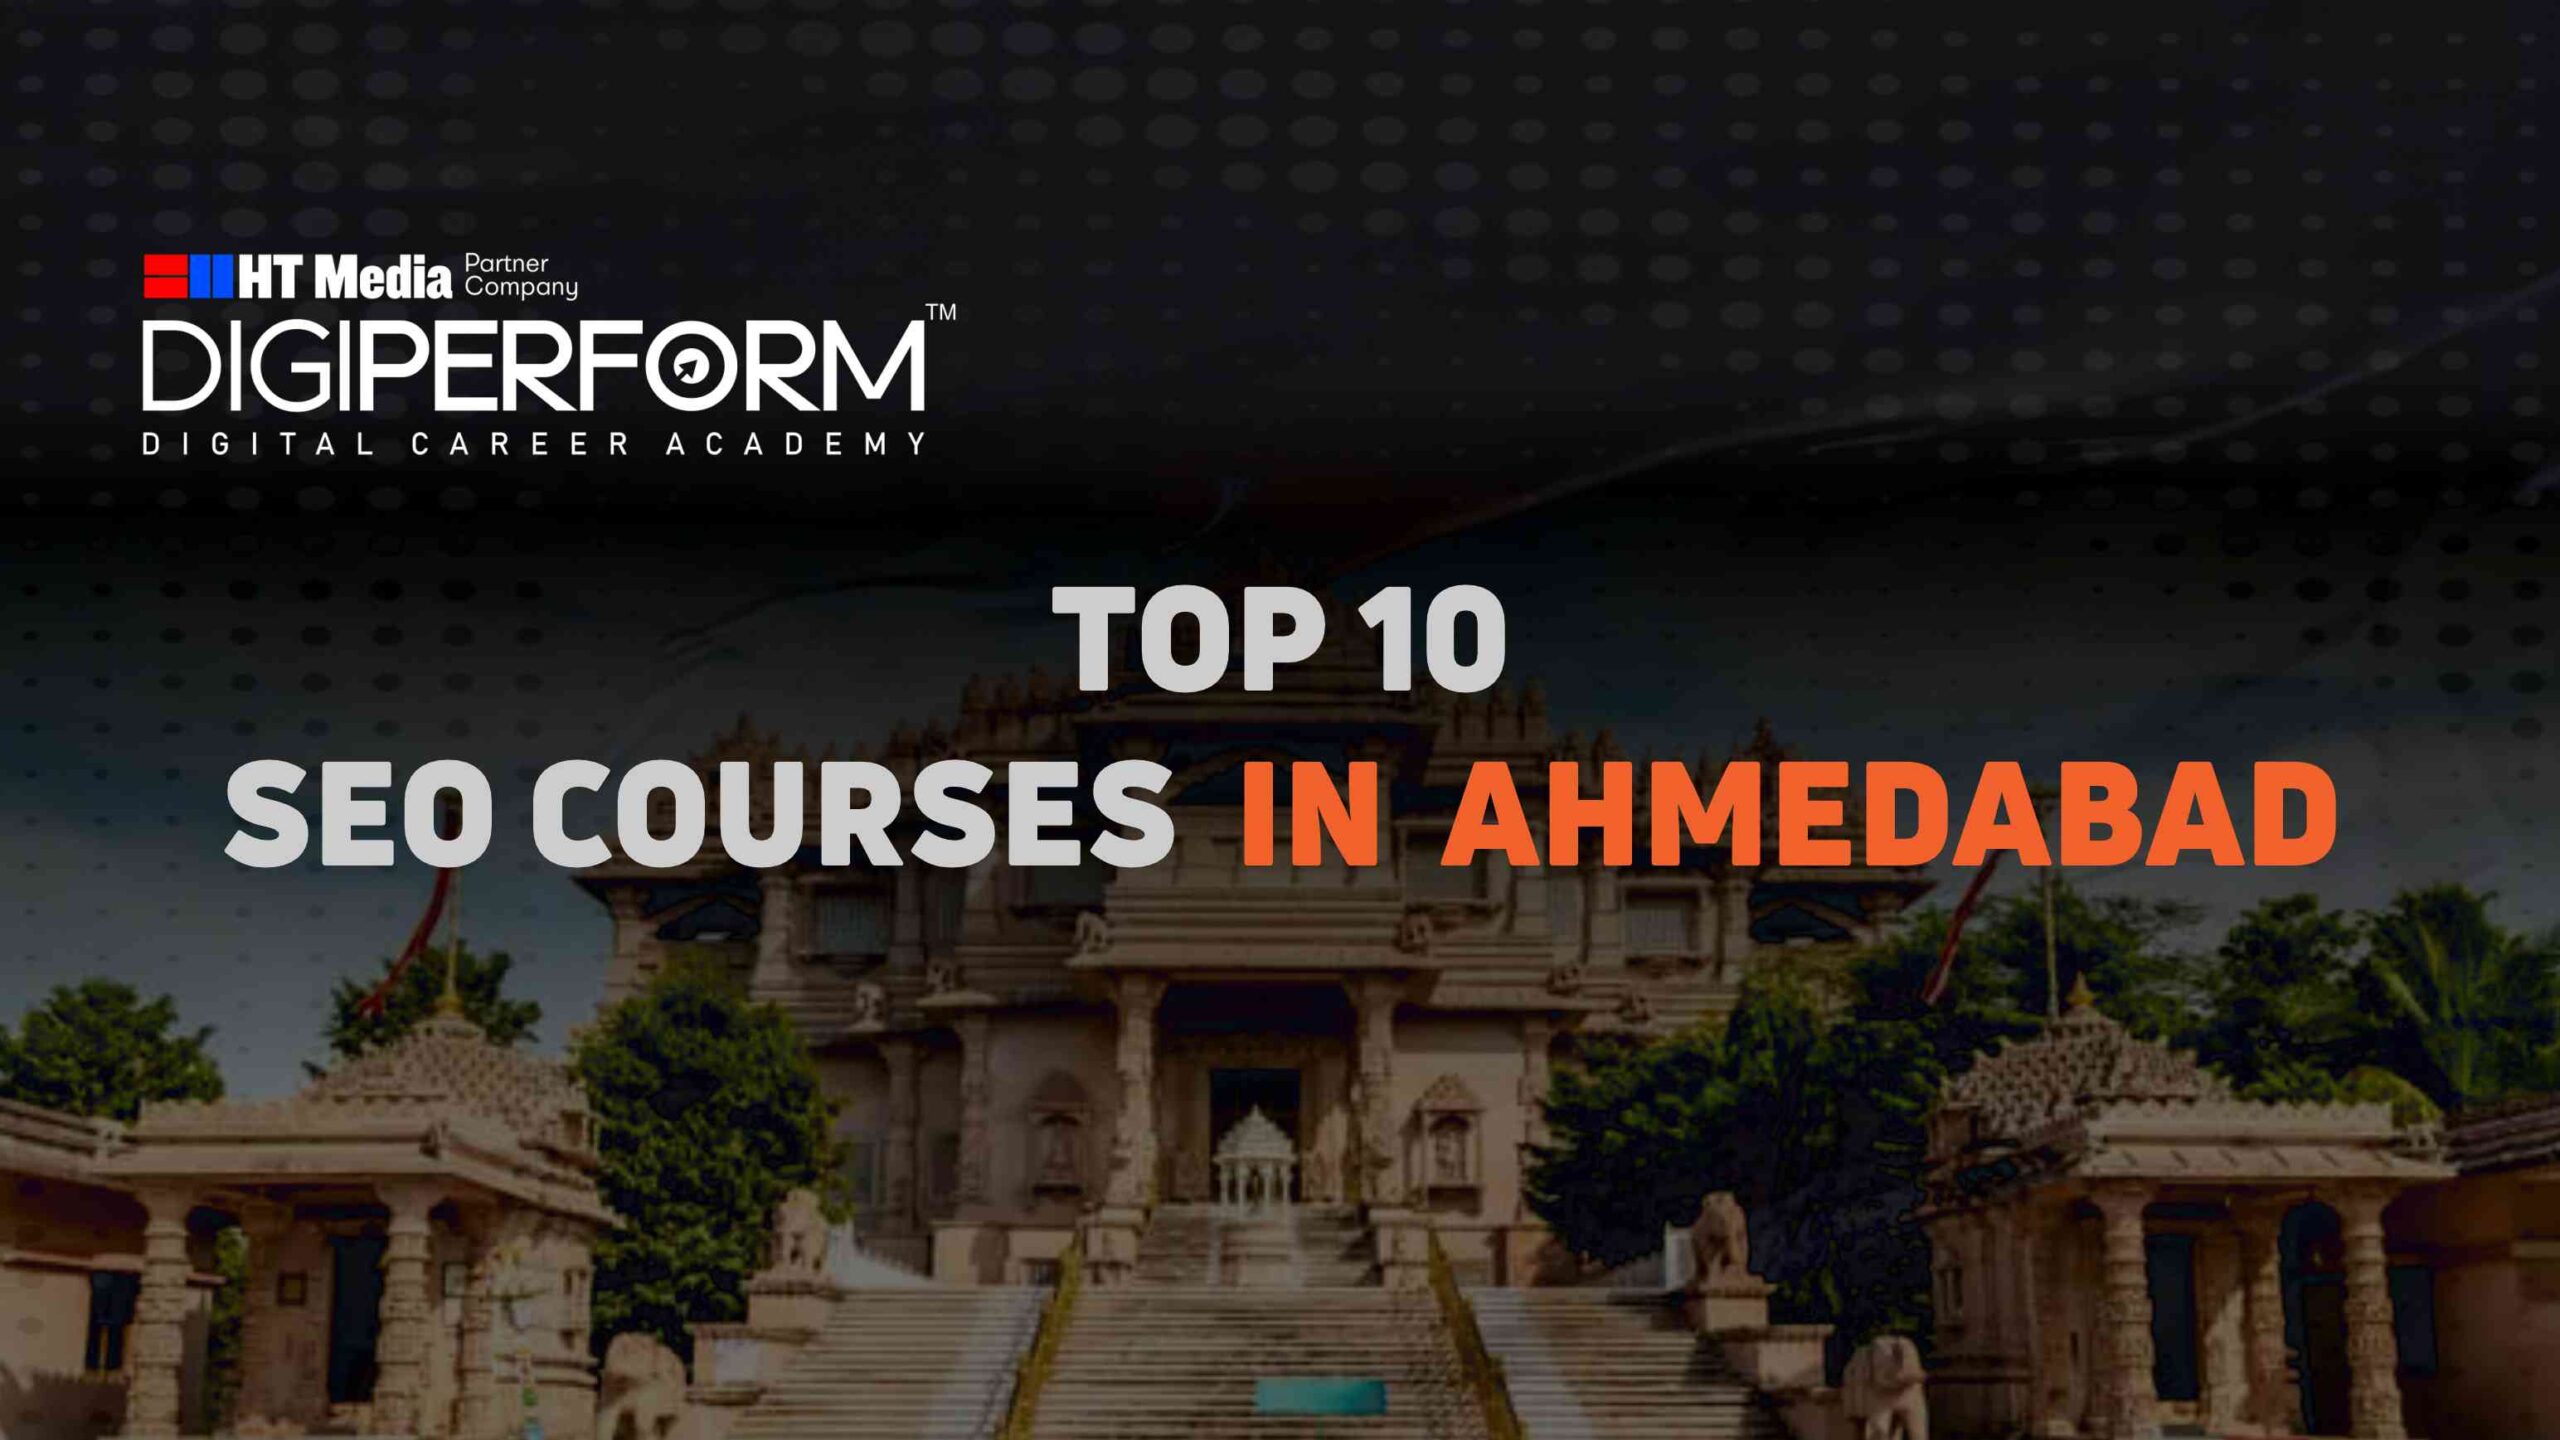 Top 10 SEO Courses In Ahmedabad